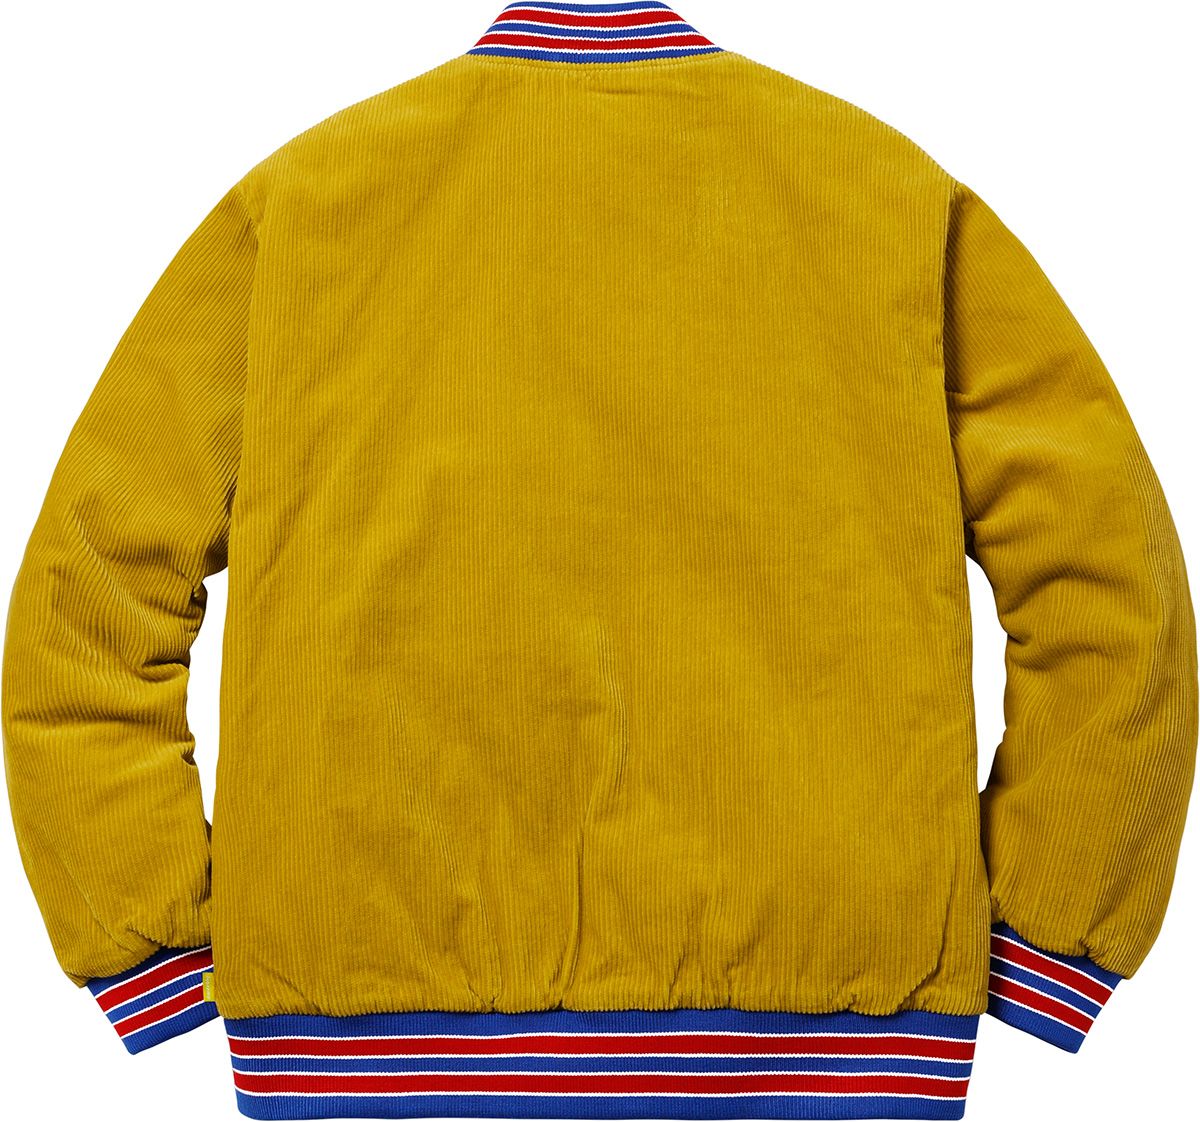 Old English Corduroy Varsity Jacket - Spring/Summer 2018 Preview 